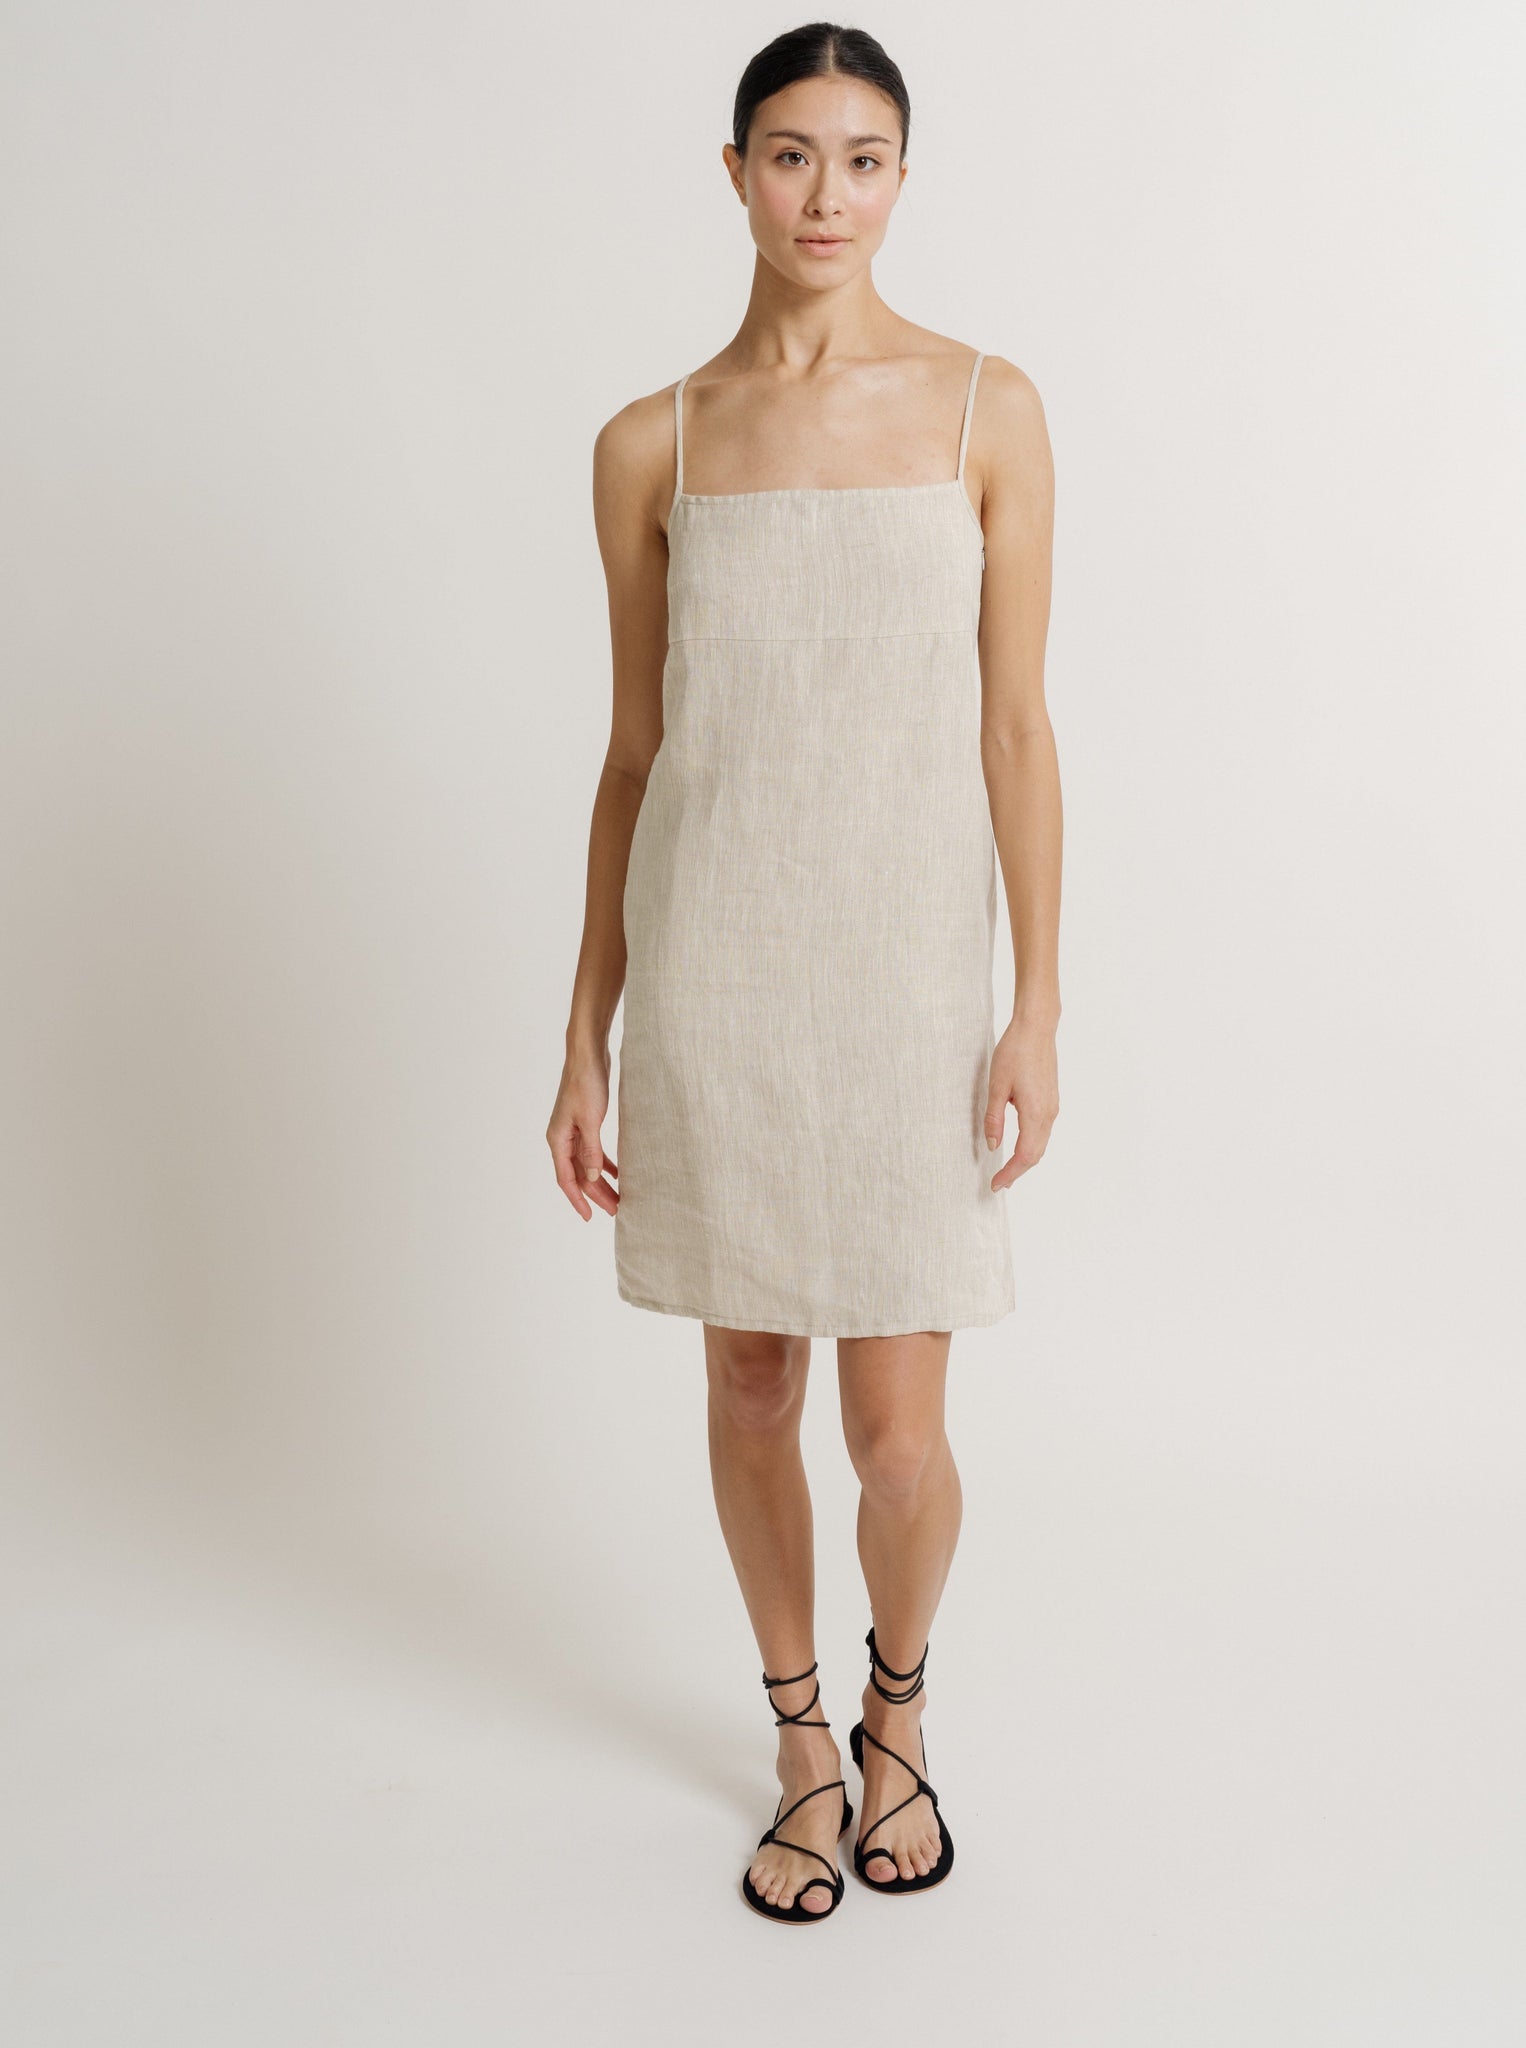 Woman in a like-new, Linen Mini Dress - Natural - Sample and black sandals standing against a neutral background for a photoshoot.